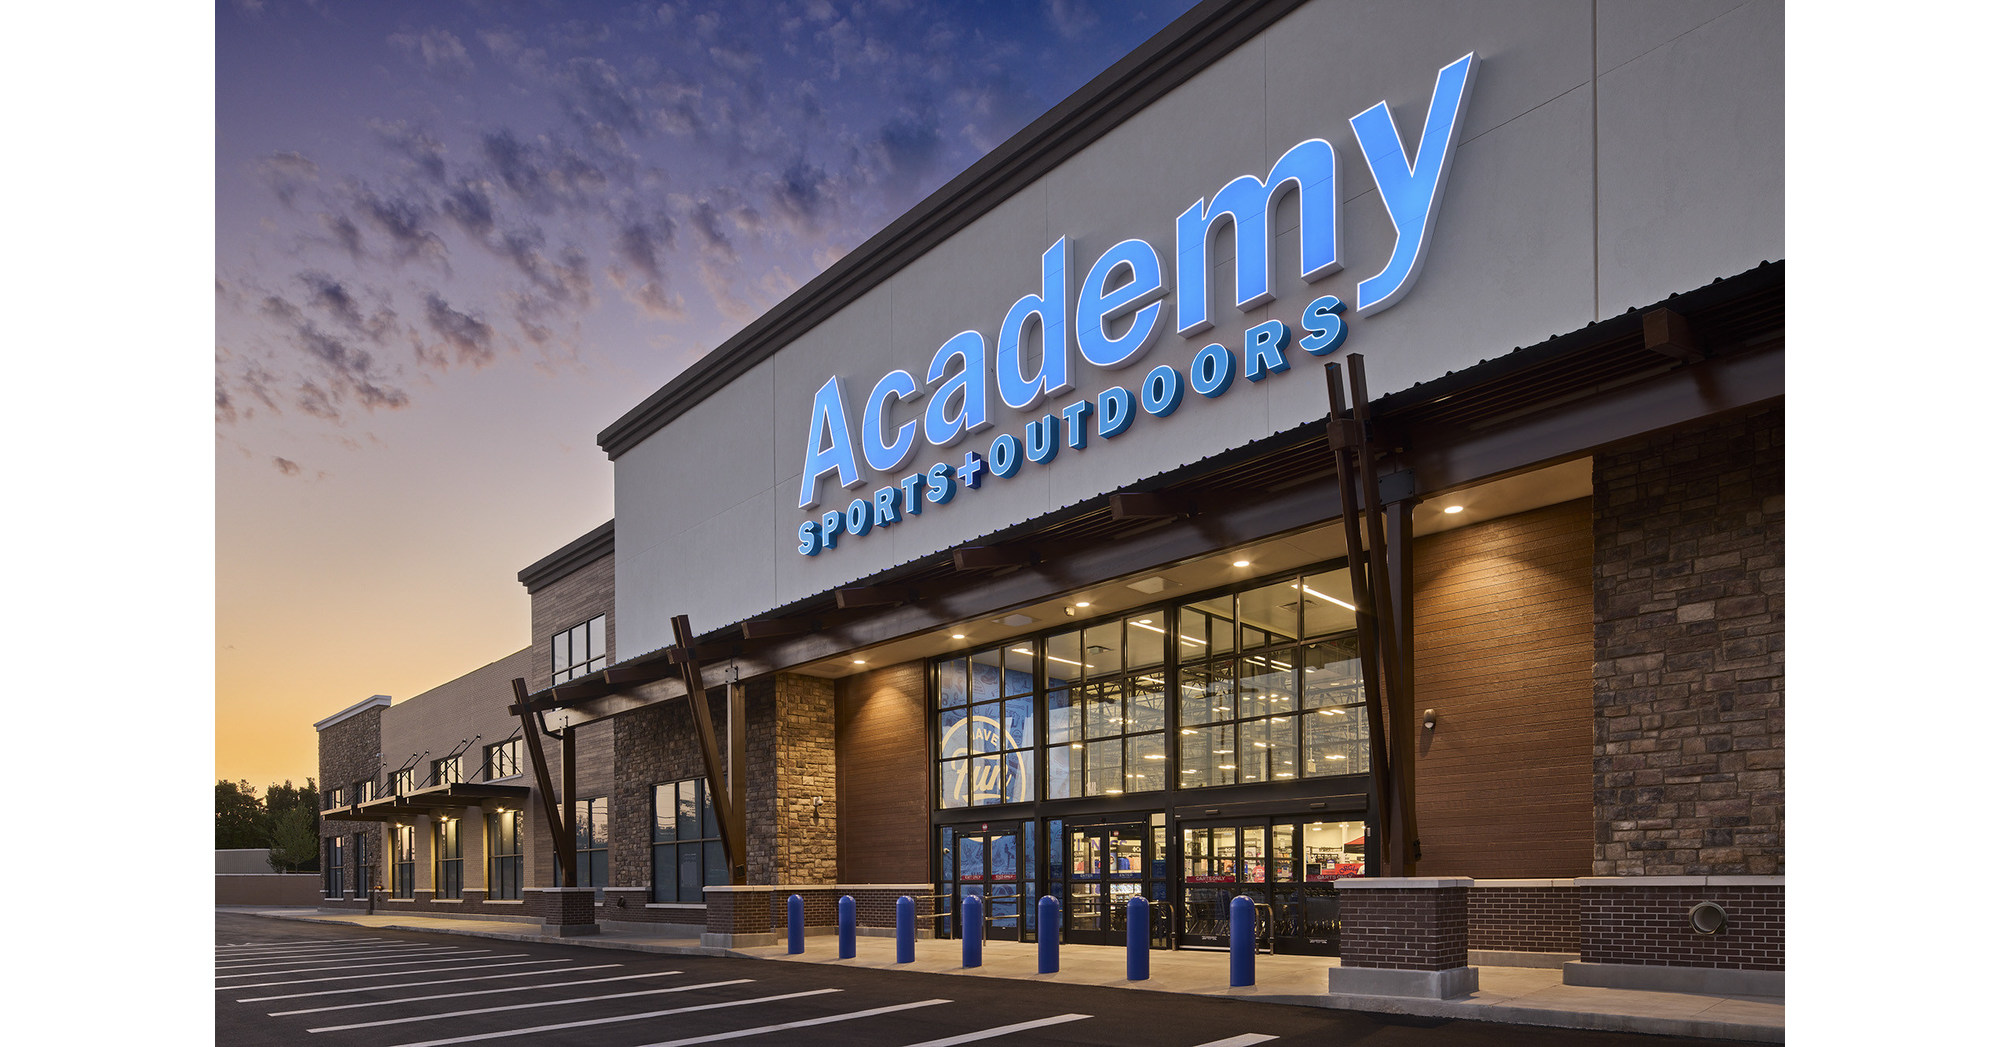 Academy Sports + Outdoors Opens New Store in Panama City, Fla.